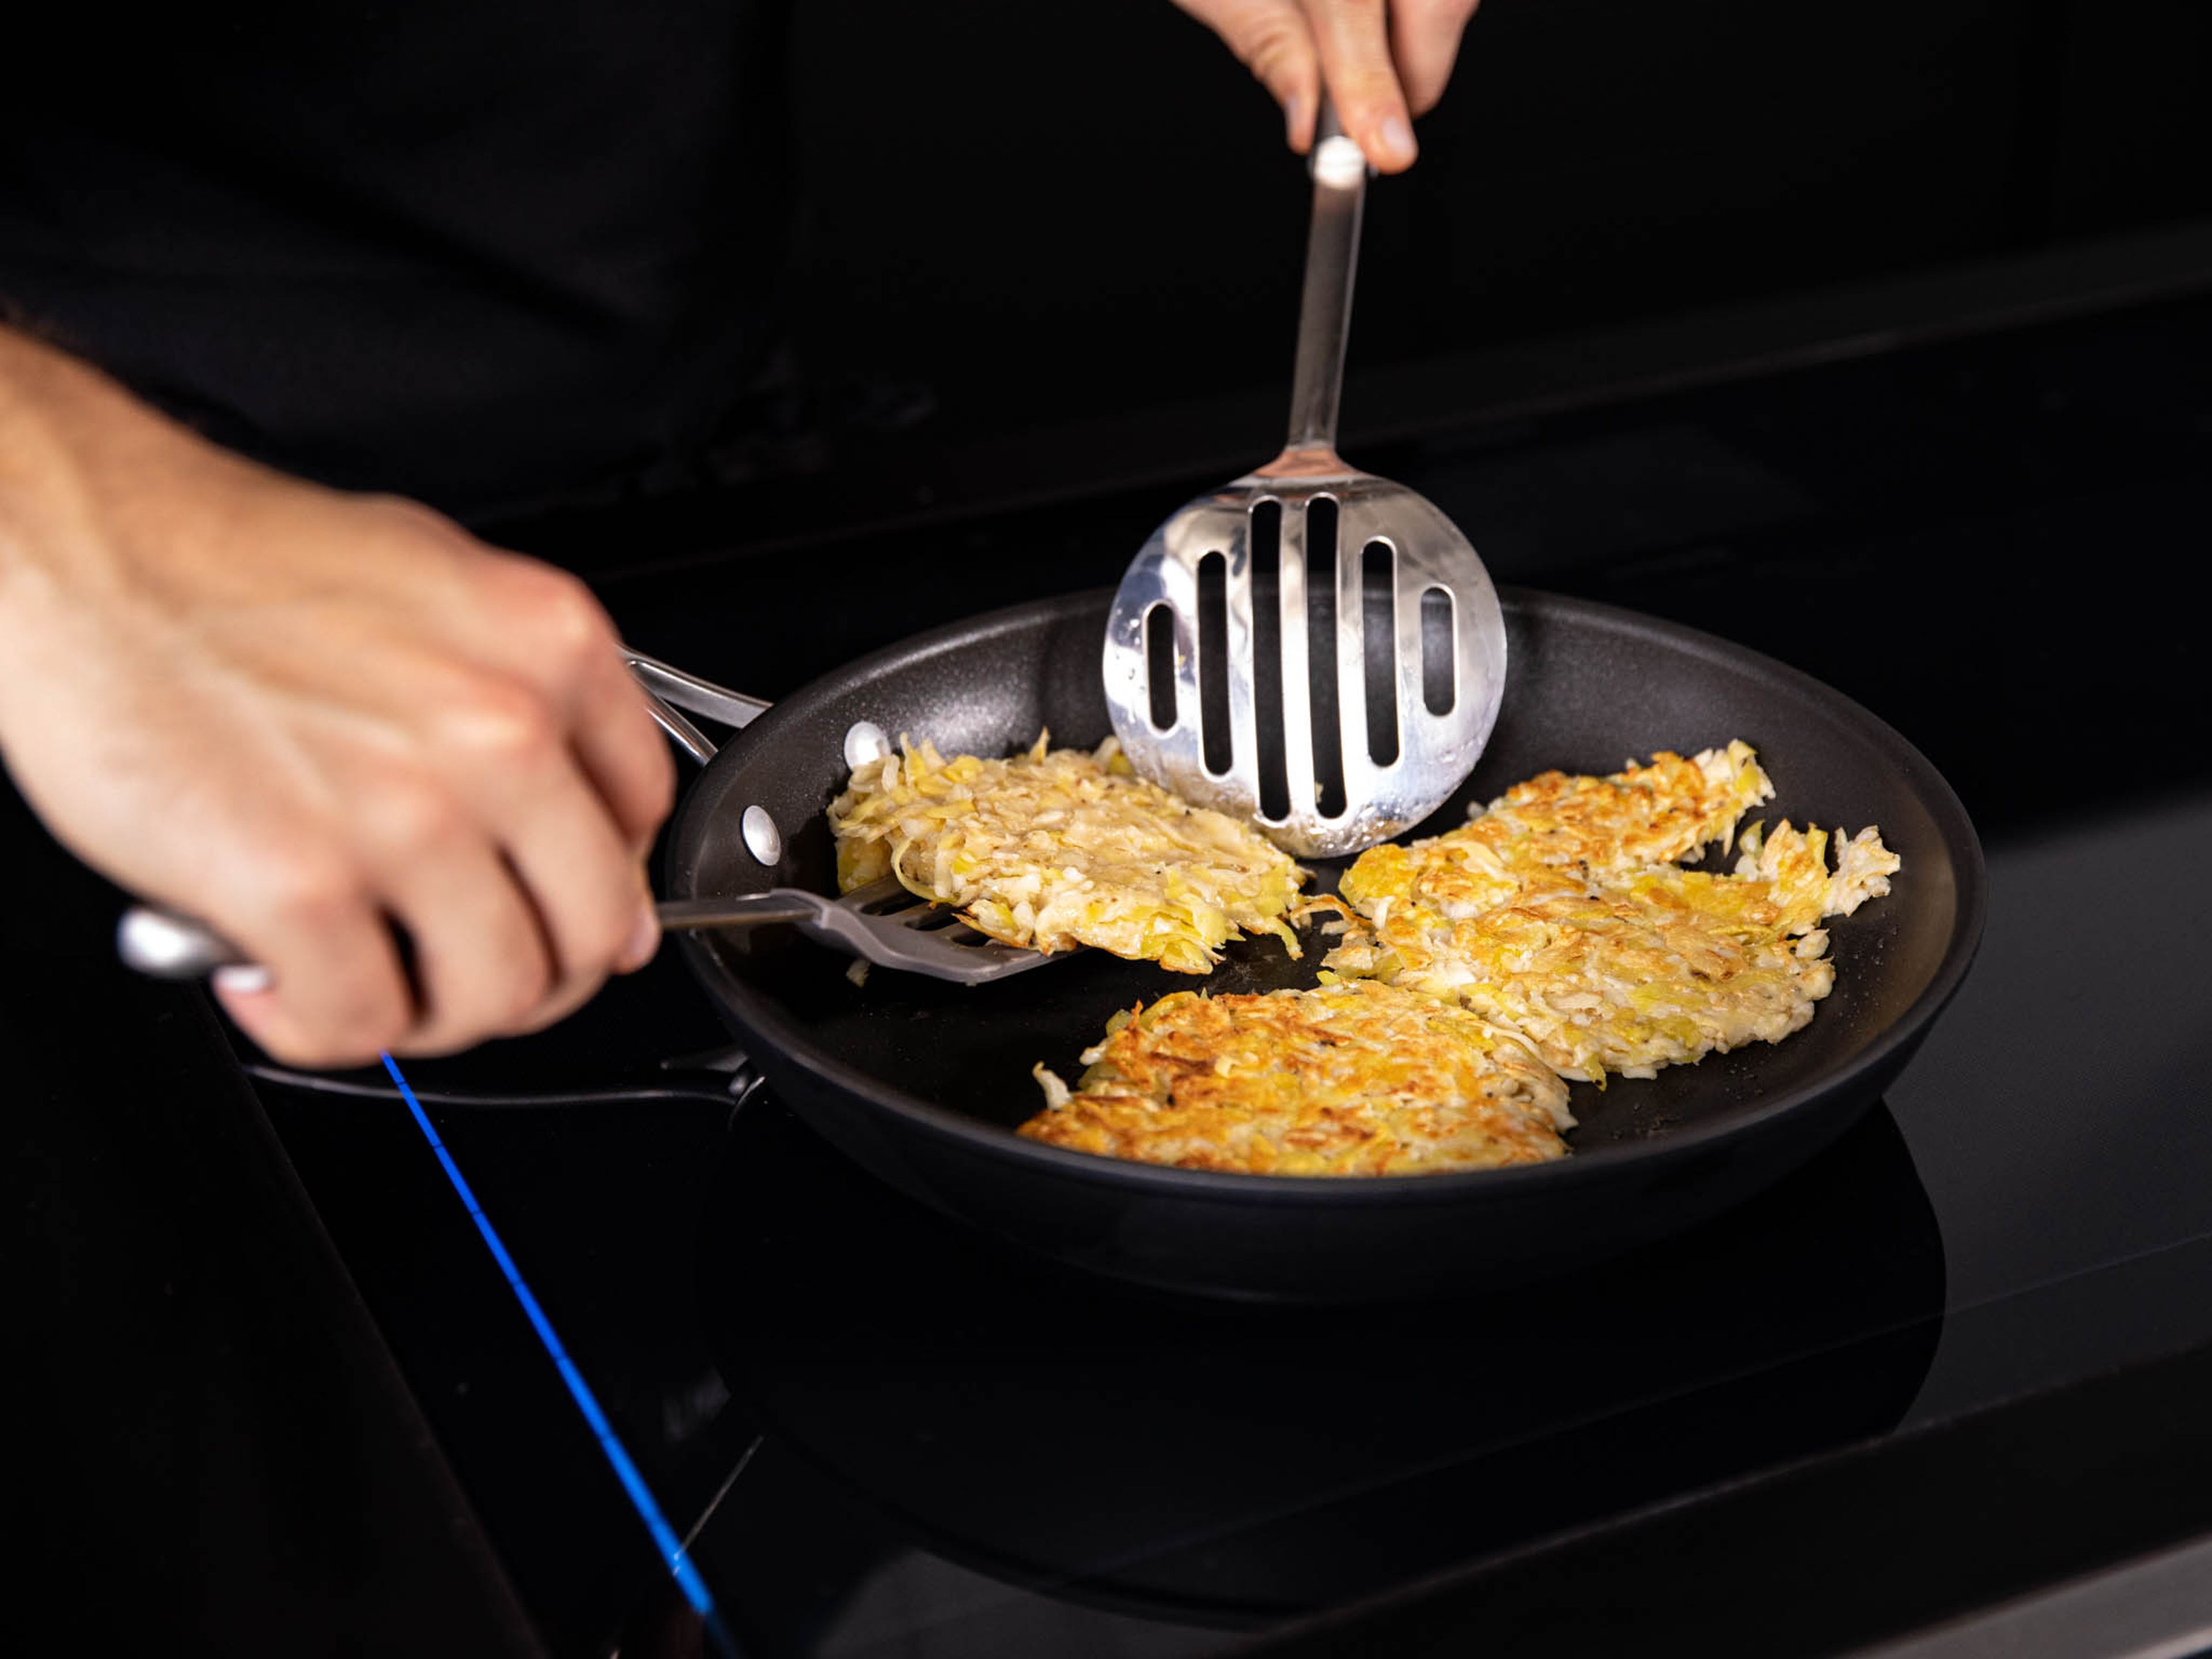 Add oil to a non-stick frying pan over a low-medium heat. Allow to warm up for approx 1 min., add the rösti, then cook over a low-medium heat for around 10 min. Press into shaping rings if you have them, or otherwise cook them free-form, compressing with a spatula from time to time. Don’t flip them until they’ve got a slightly browned base and are firming up, probably 4 min. or more. After cooking for 10 min. in total, when the rösti are beginning to turn golden and crisp at the edges, add one quarter of the kimchi butter to the pan so it foams and releases its fragrance. Flip the rösti in butter and cook for a further 1-2 min., but no more. Keep in a warm oven until serving.